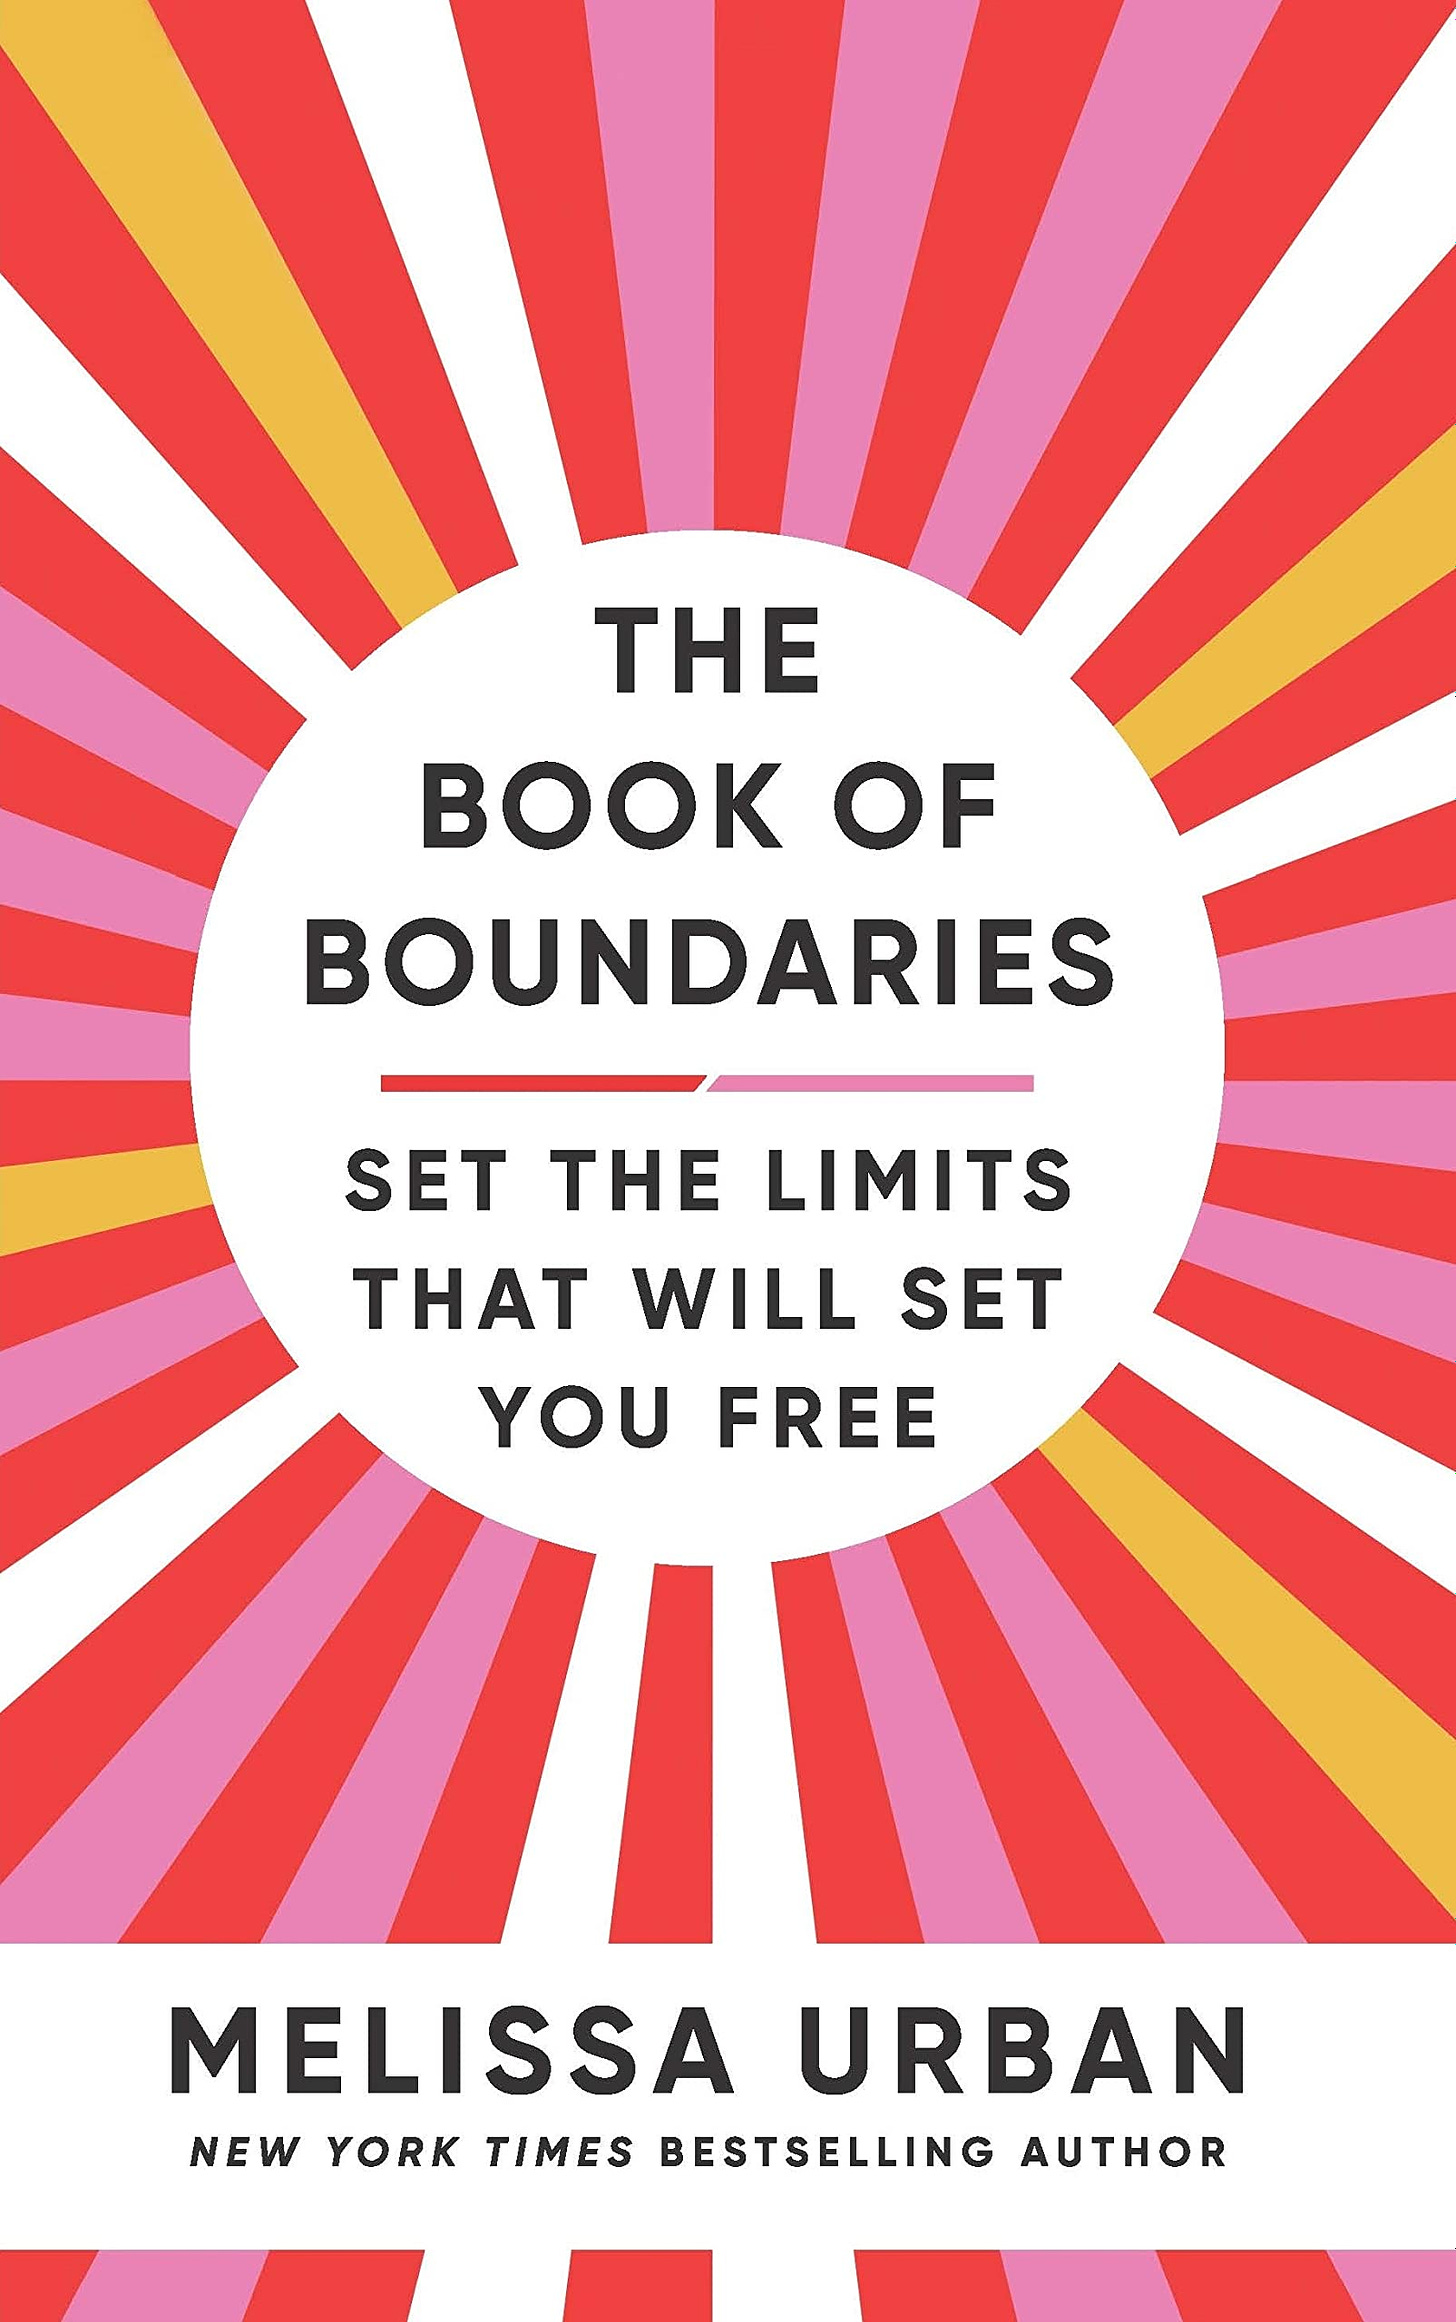 The Book of Boundaries: Set the limits that will set you free:  Amazon.co.uk: Urban, Melissa: 9781785044403: Books